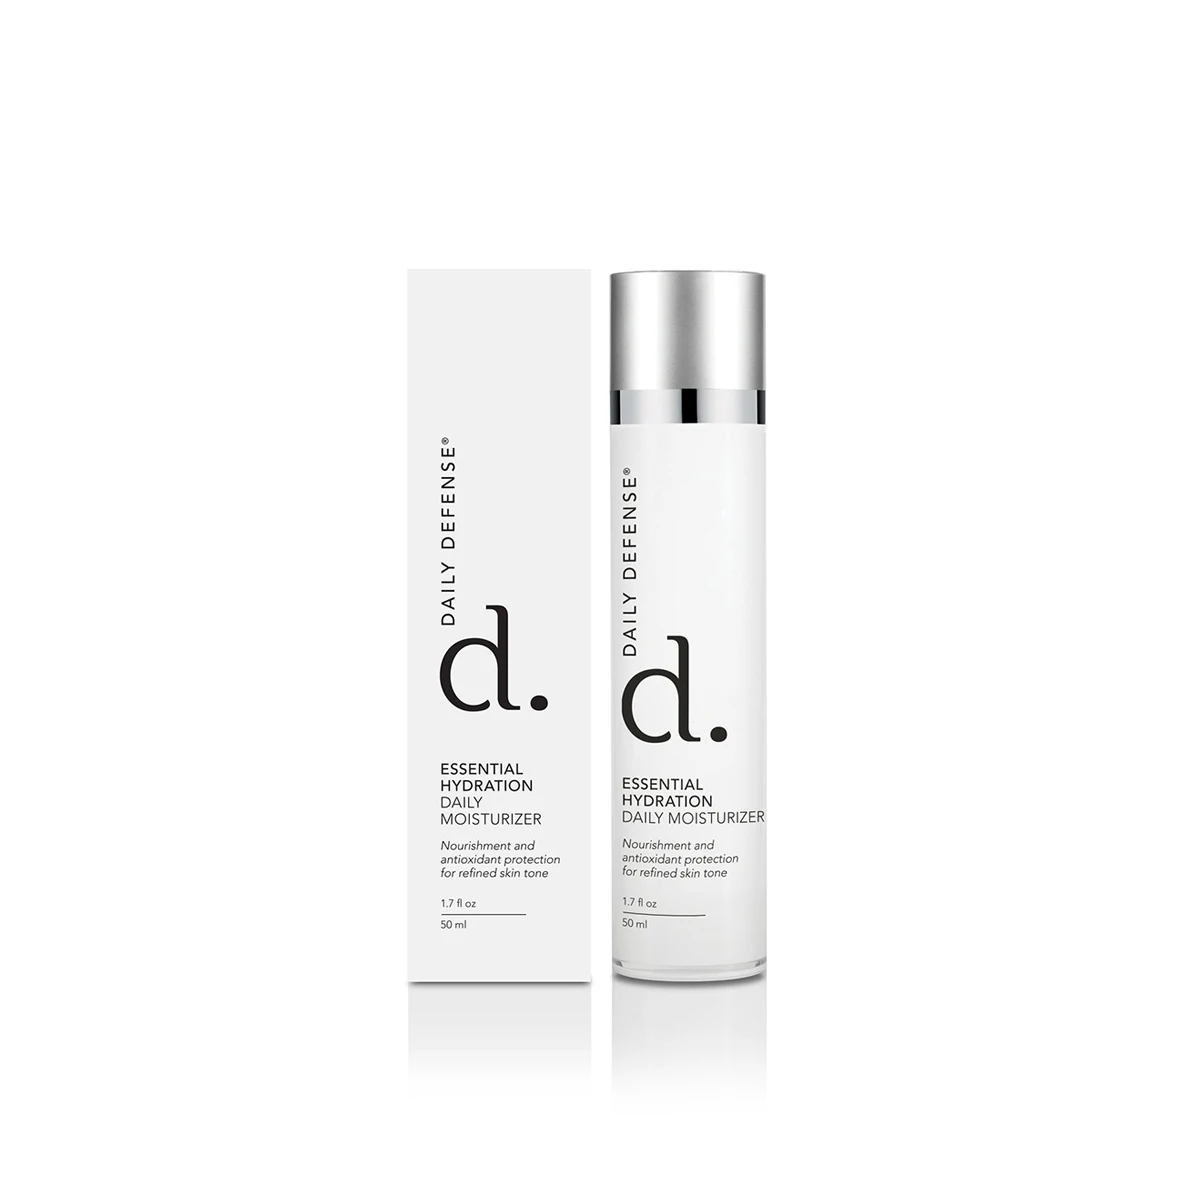 Hydration  Moisturizer Restores Skin, Erasing The Appearance Of Fine lines, Wrinkles And Discoloration